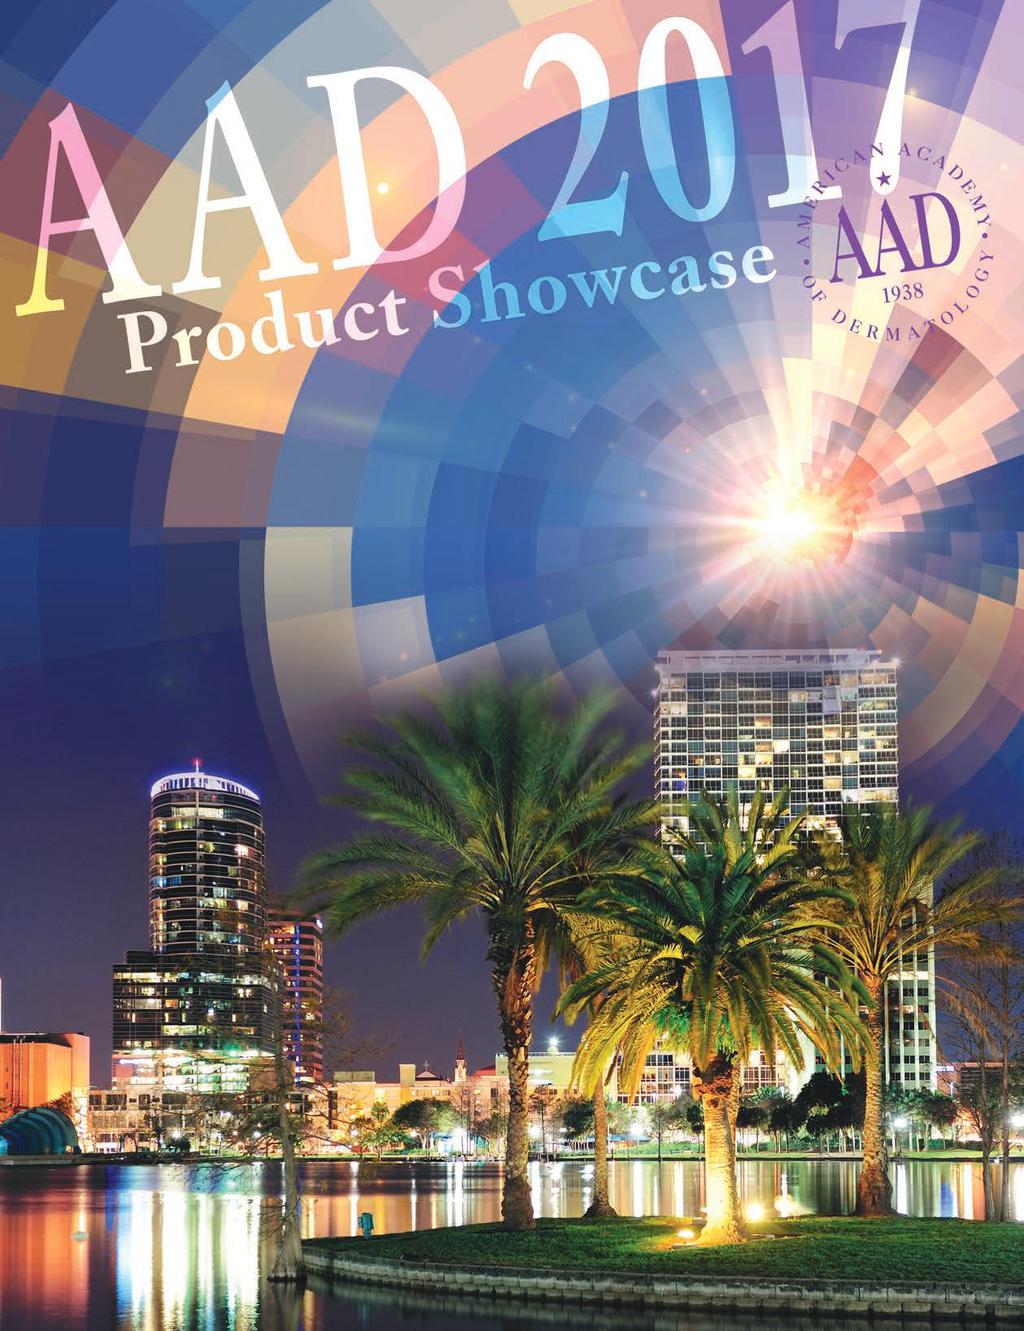 From March 3 7, 2017, the American Academy of Dermatology (AAD) will bring the best minds in this field together to create the most